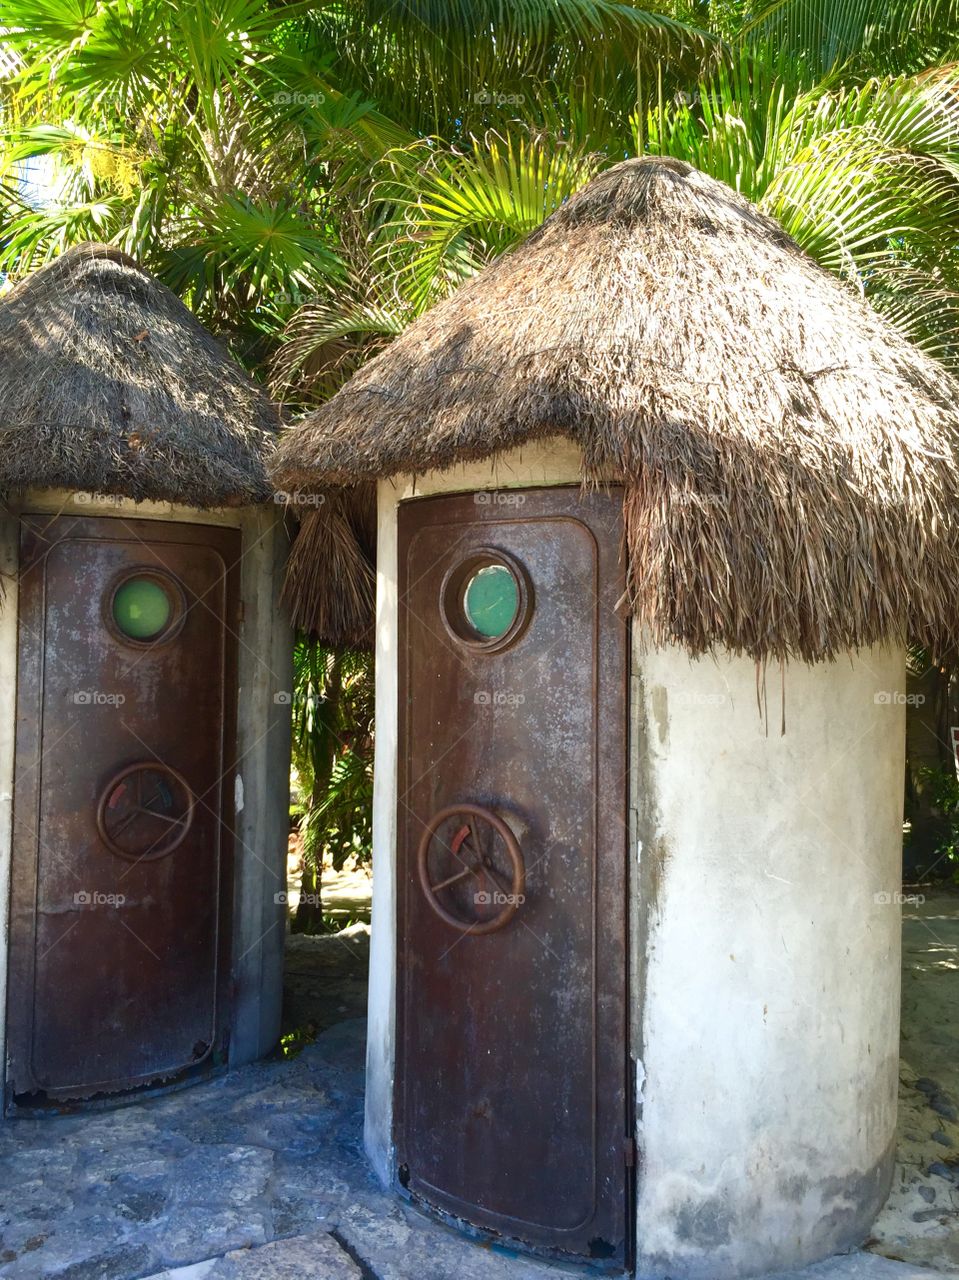 Toilet huts looking like bunker, Mexico beach